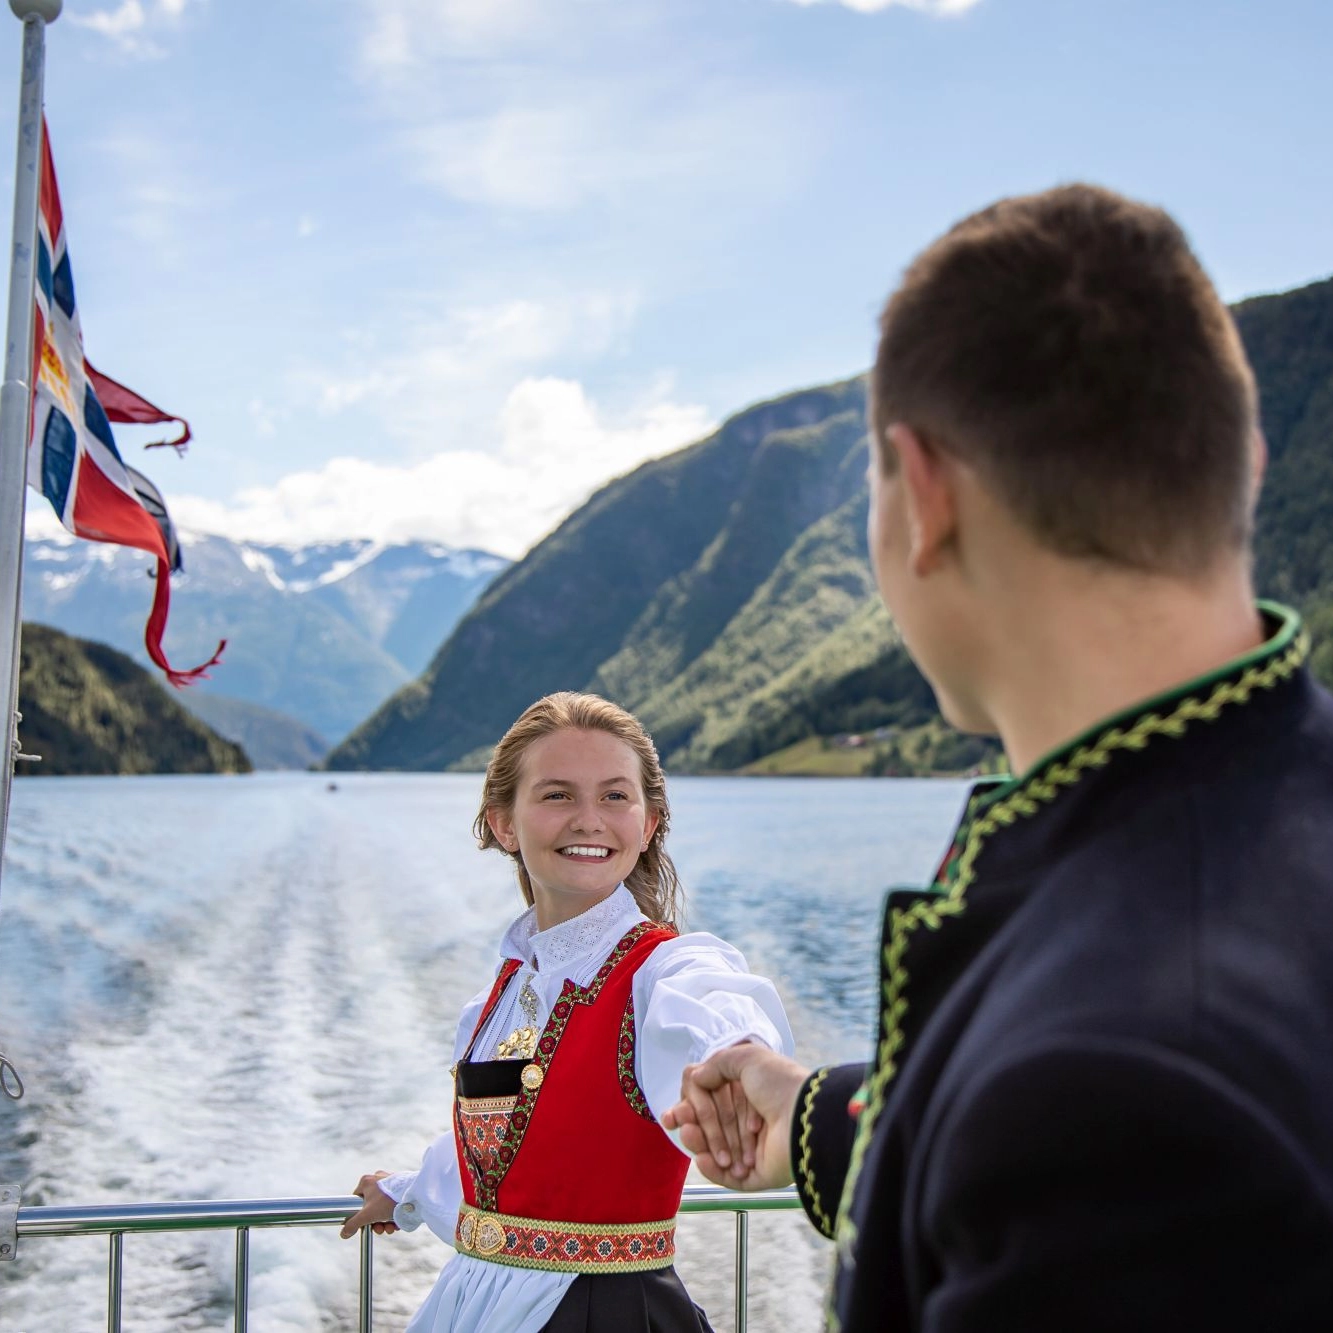 Wearing Norwegian national dress "bunad" on the Sognefjord in a nutshell tour - Norway